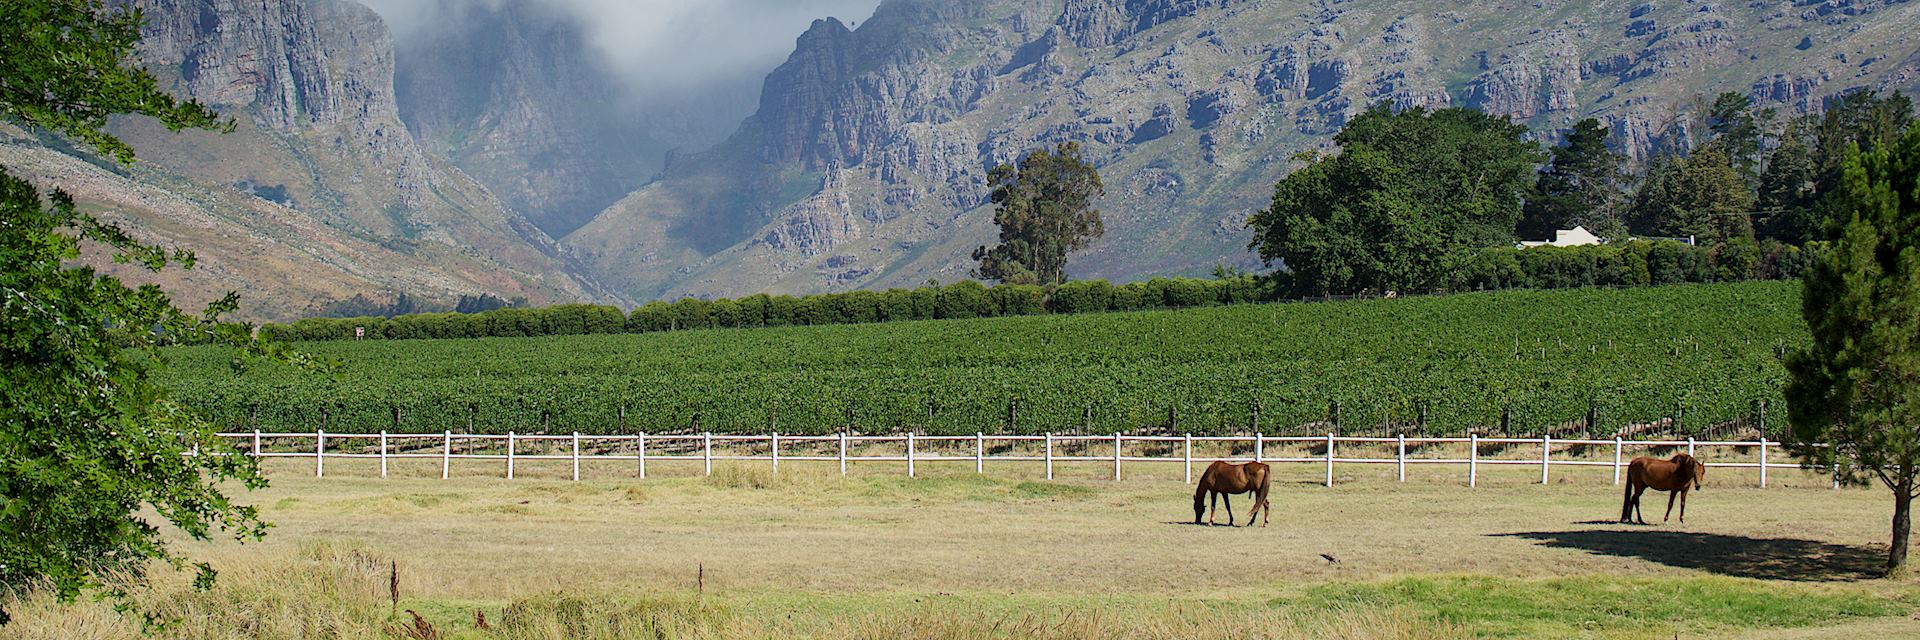 Horses in the Winelands